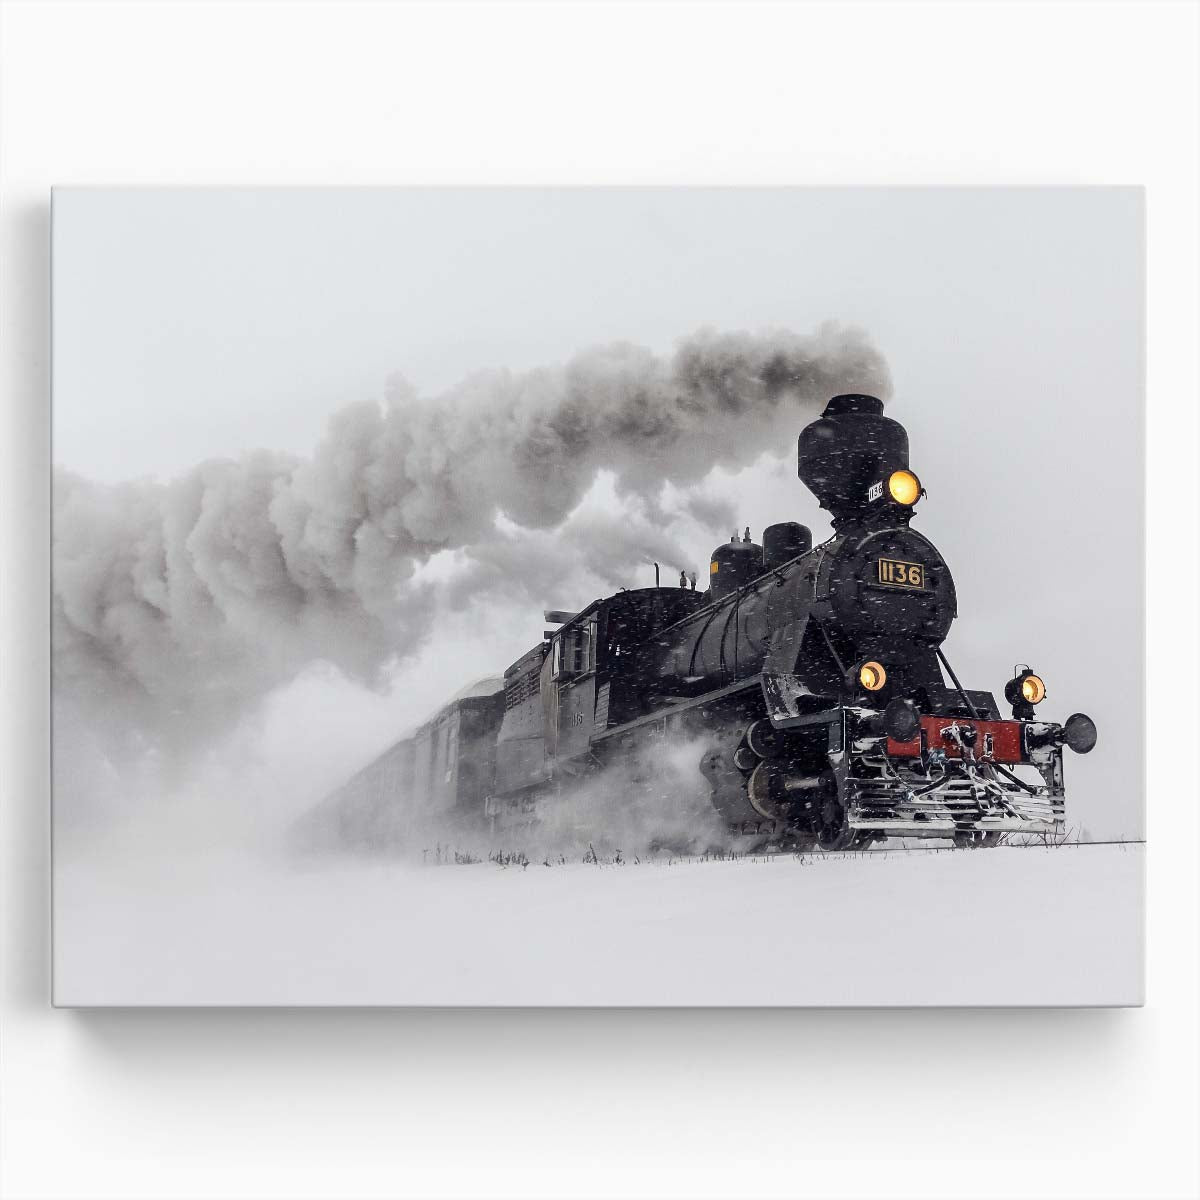 Vintage Steam Train Winter Rush Wall Art by Luxuriance Designs. Made in USA.